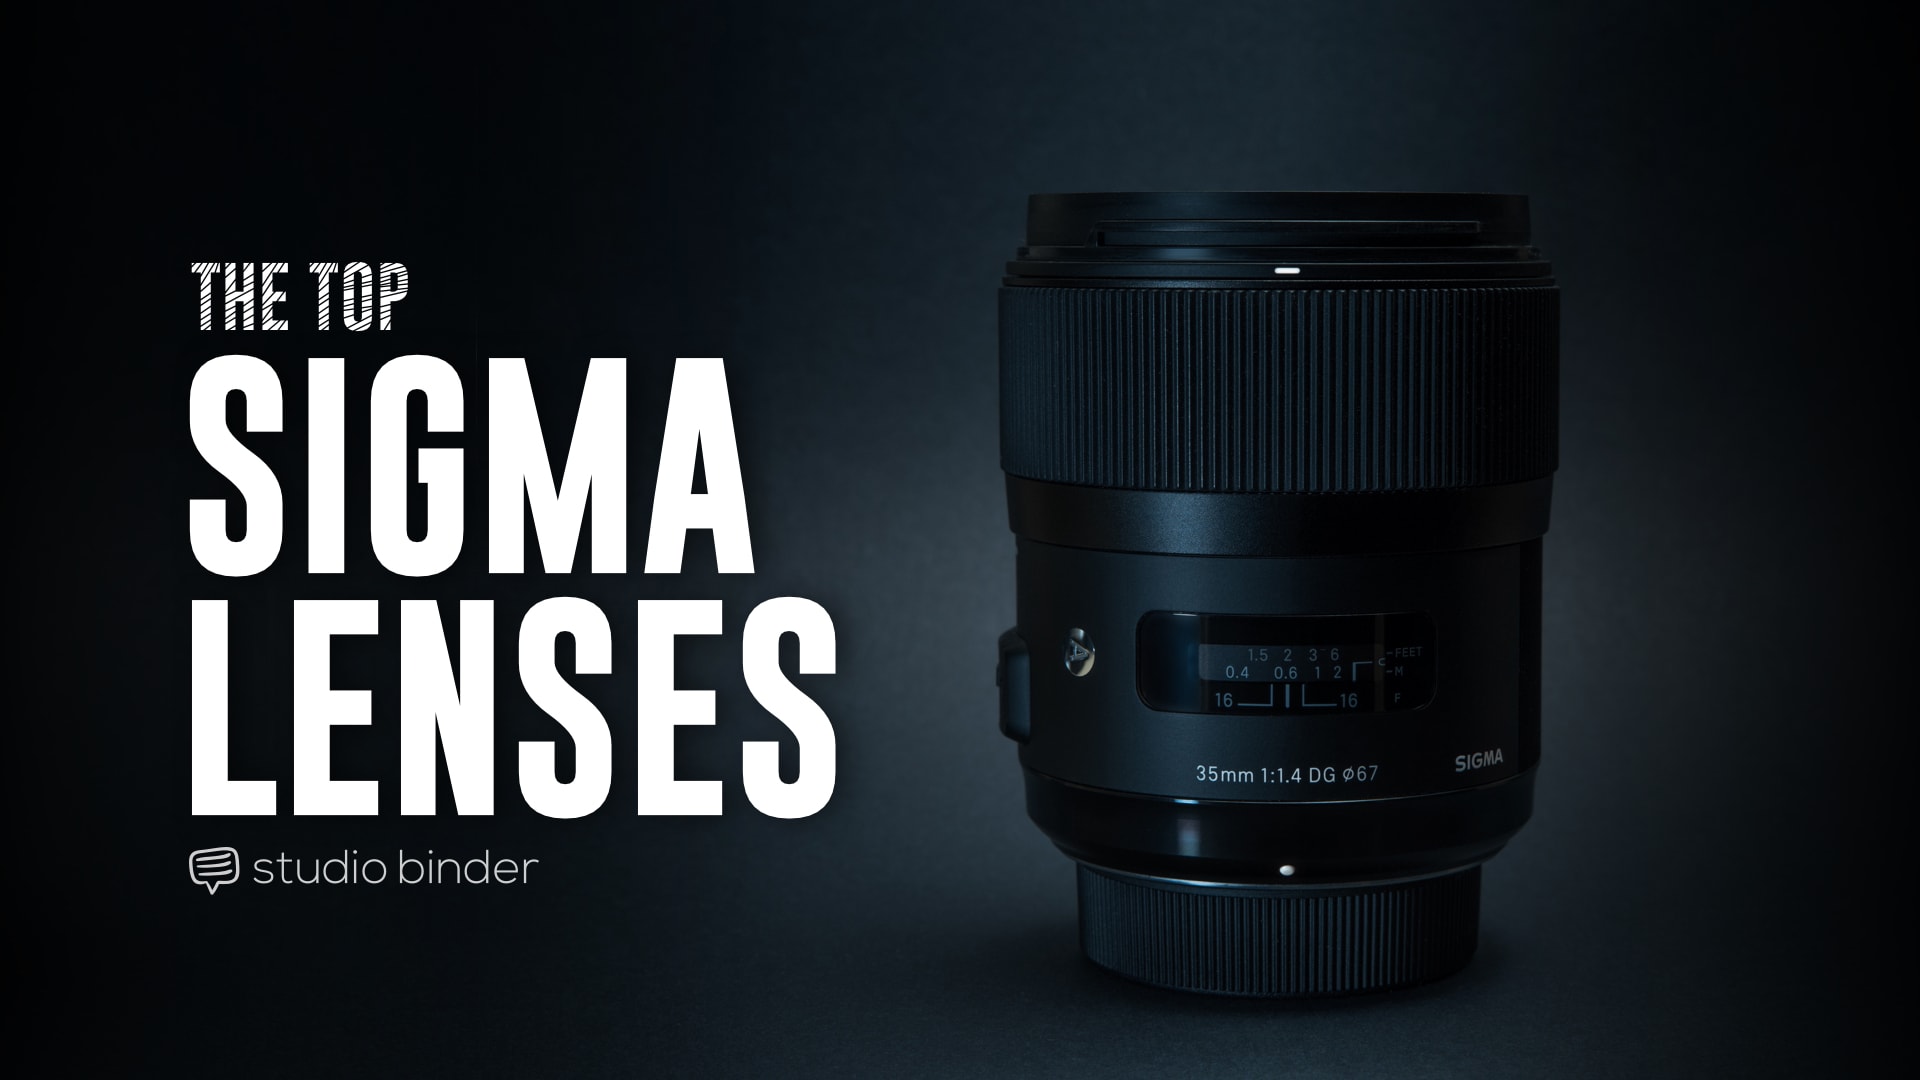 best sigma lens for canon